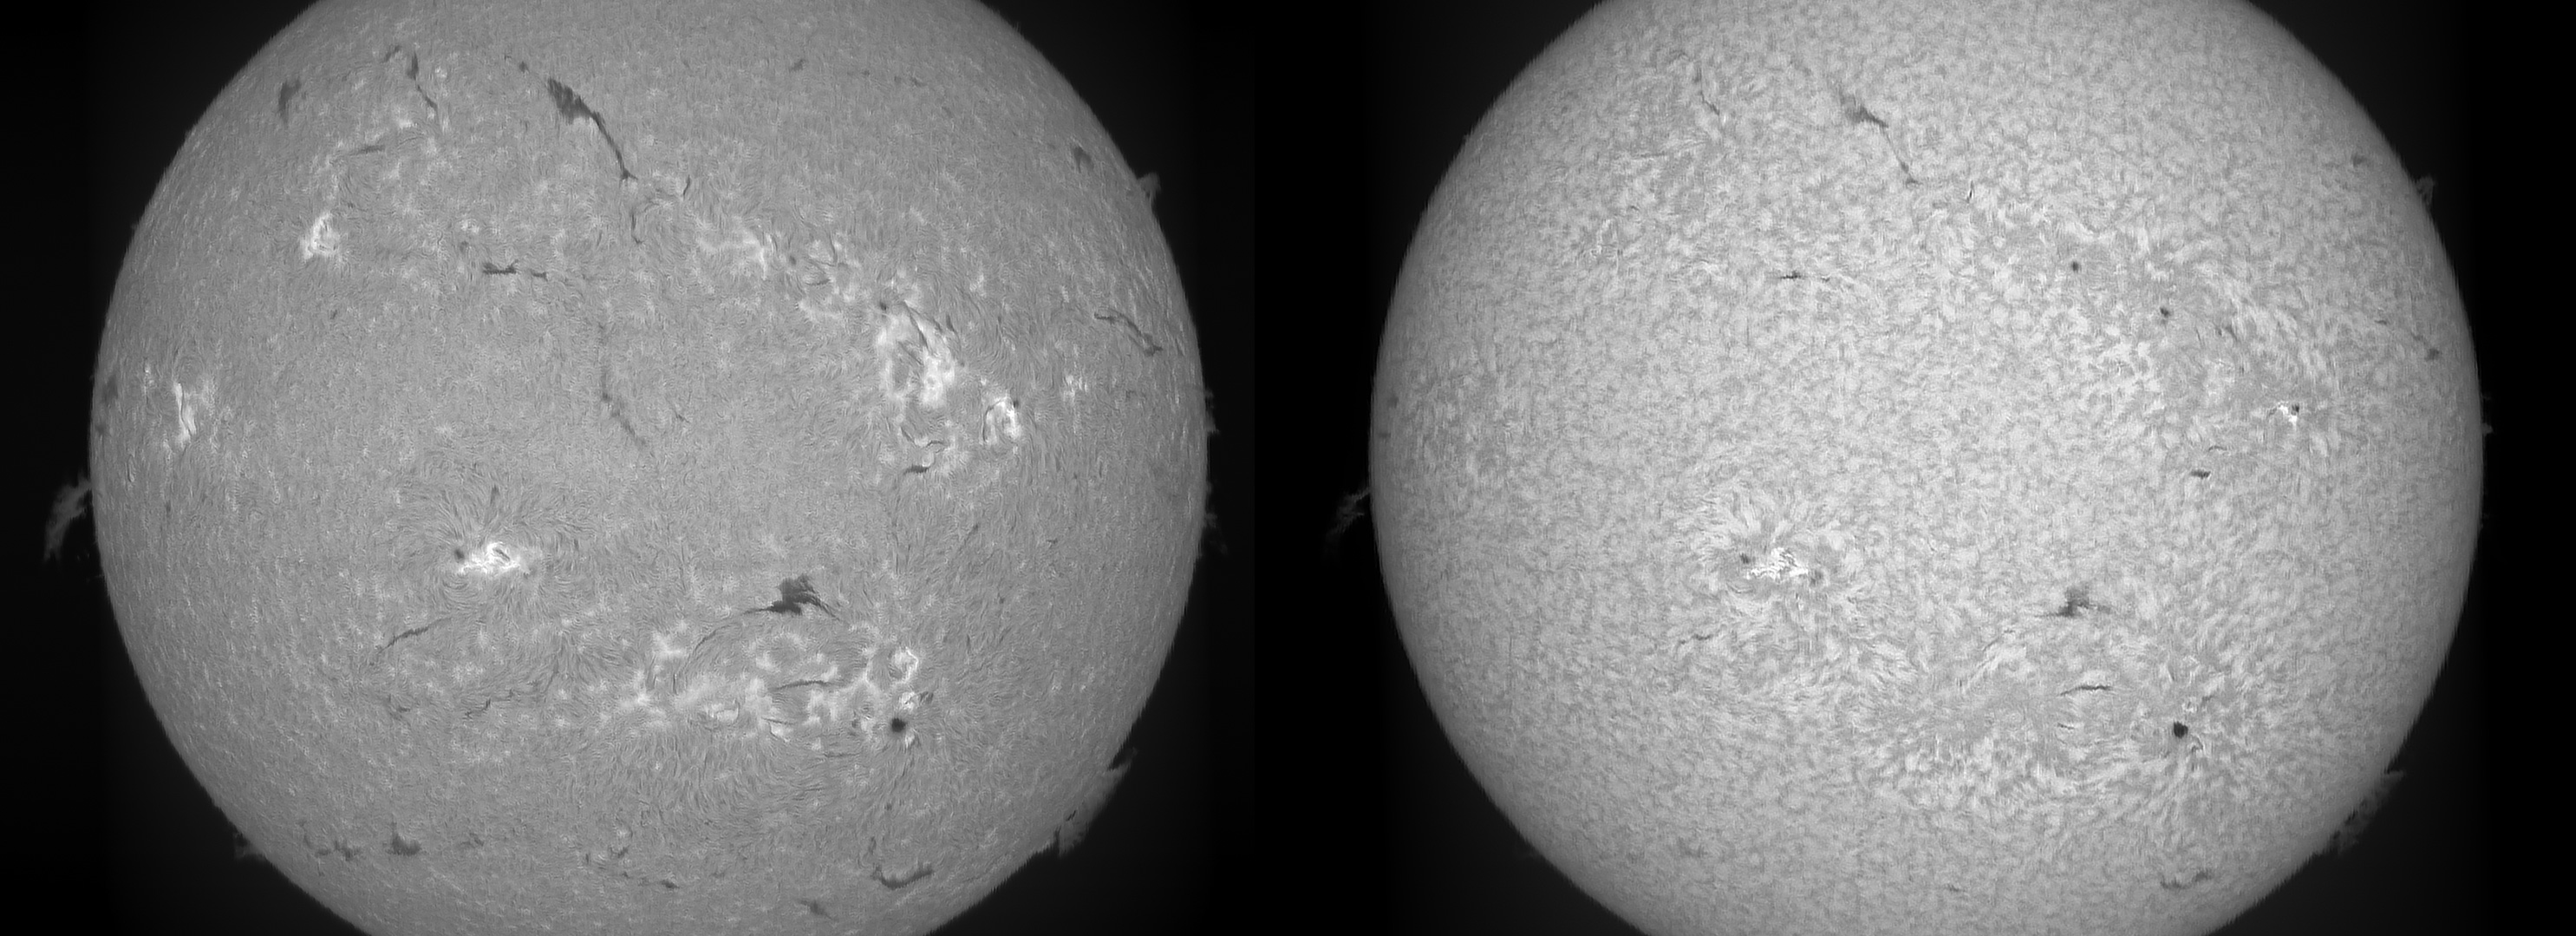 H-alpha (left) and H-beta (right) SHG images. ZWO 178MM camera.<br />H-alpha: 3ms exposure, gain 9%, 324fps, stack of 10. H-beta: 1ms exposure, gain 8%, 400fps, stack of 7.